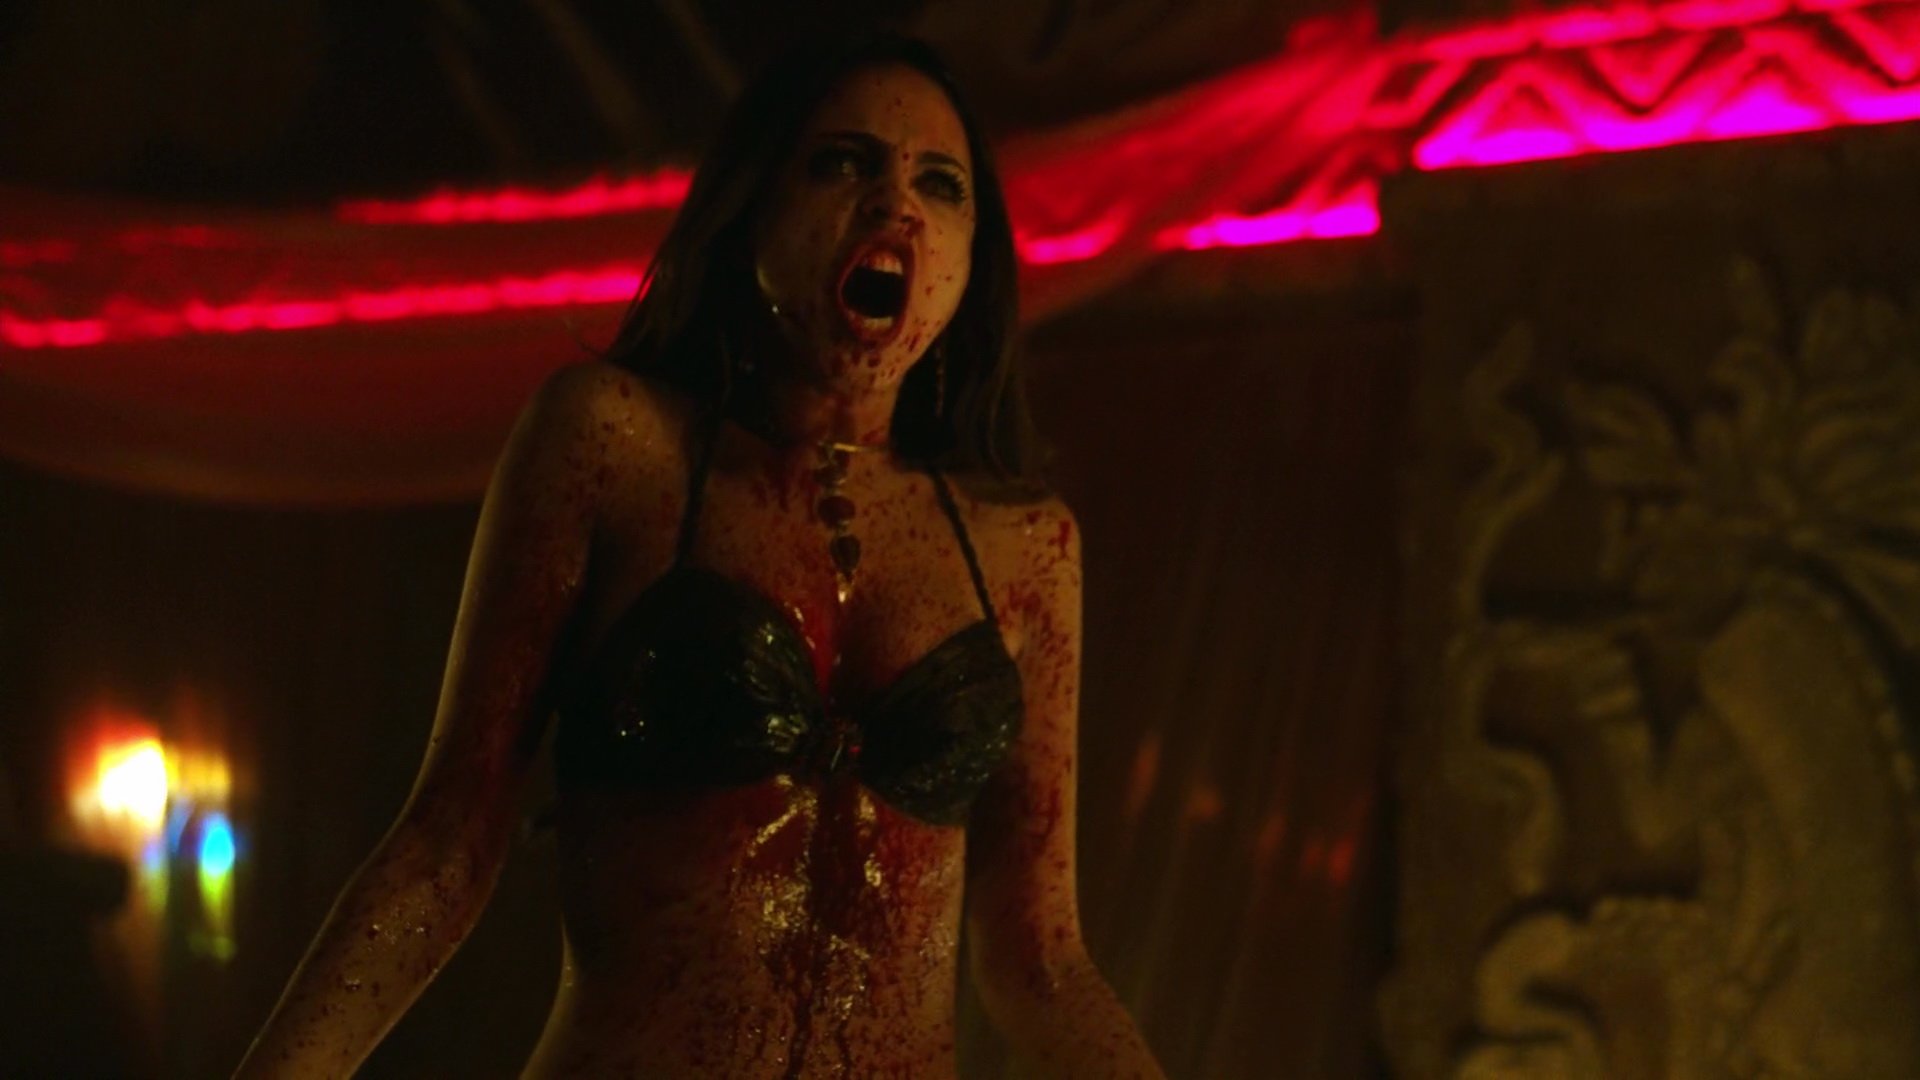 Naked Eiza González In From Dusk Till Dawn The Series